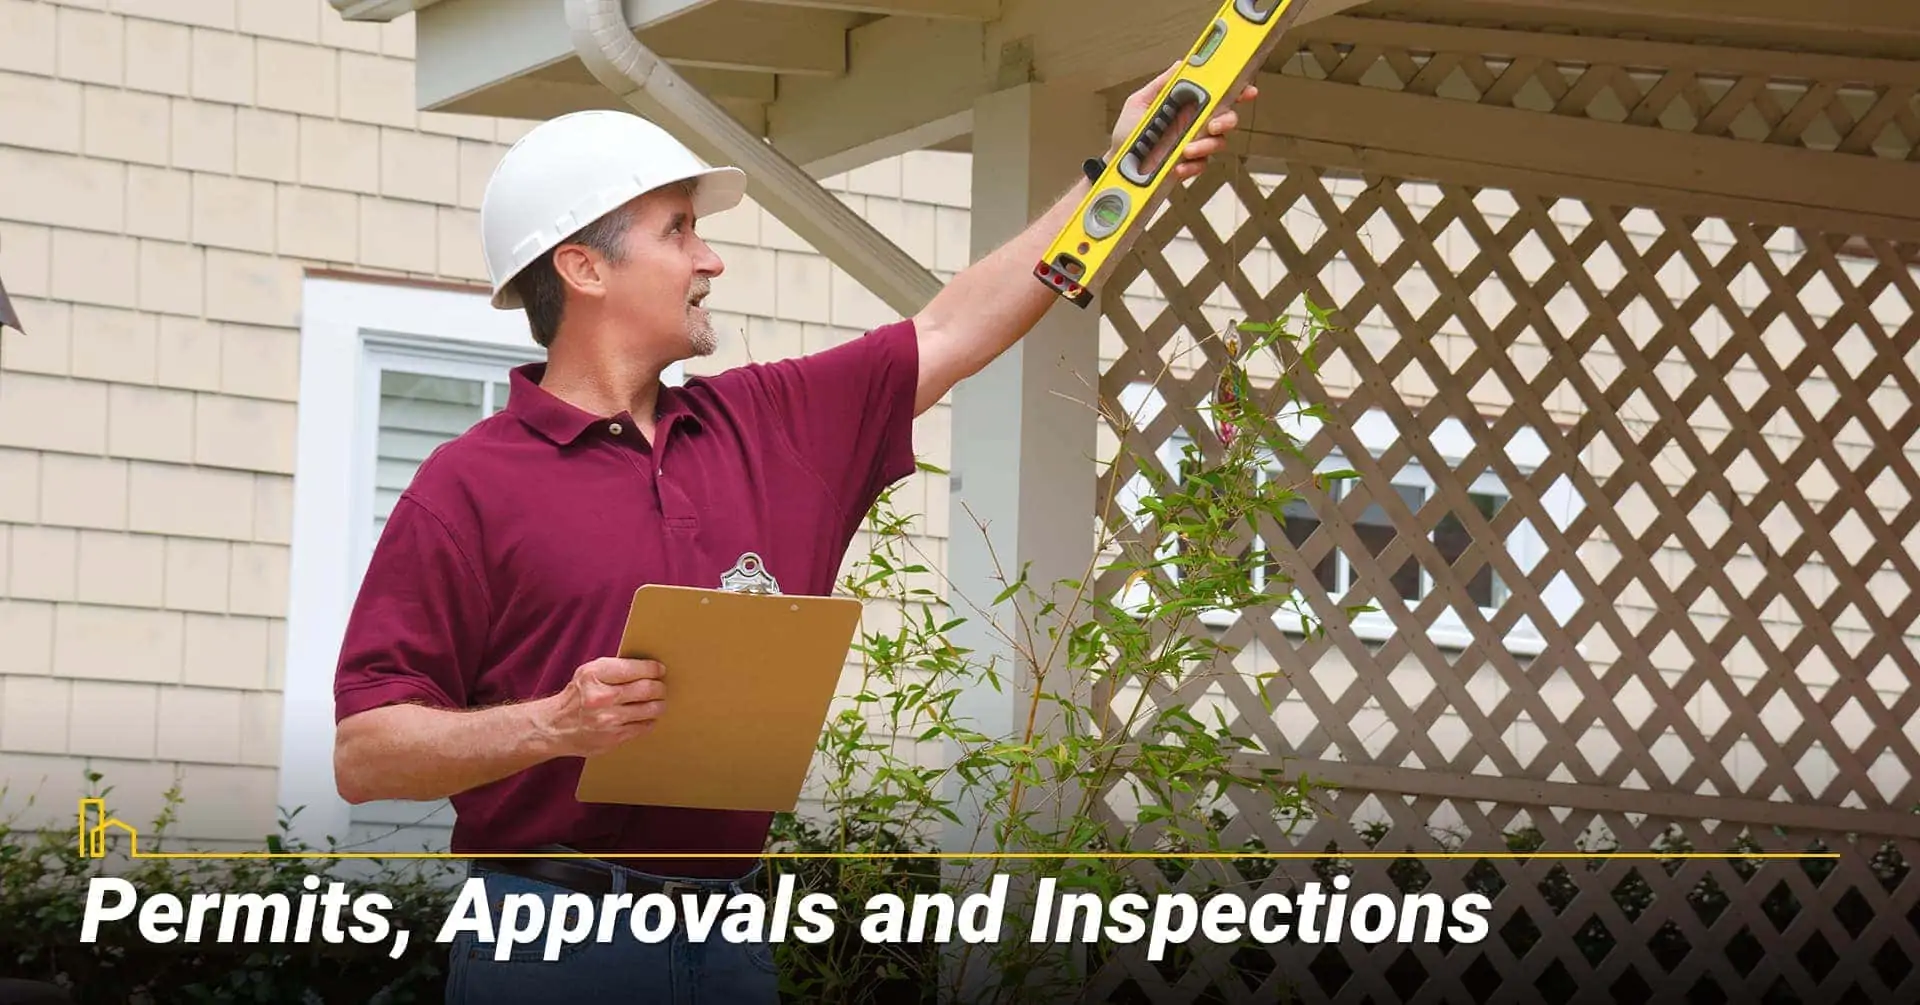 Permits, Approvals and Inspections, get all legal paperwork before you start